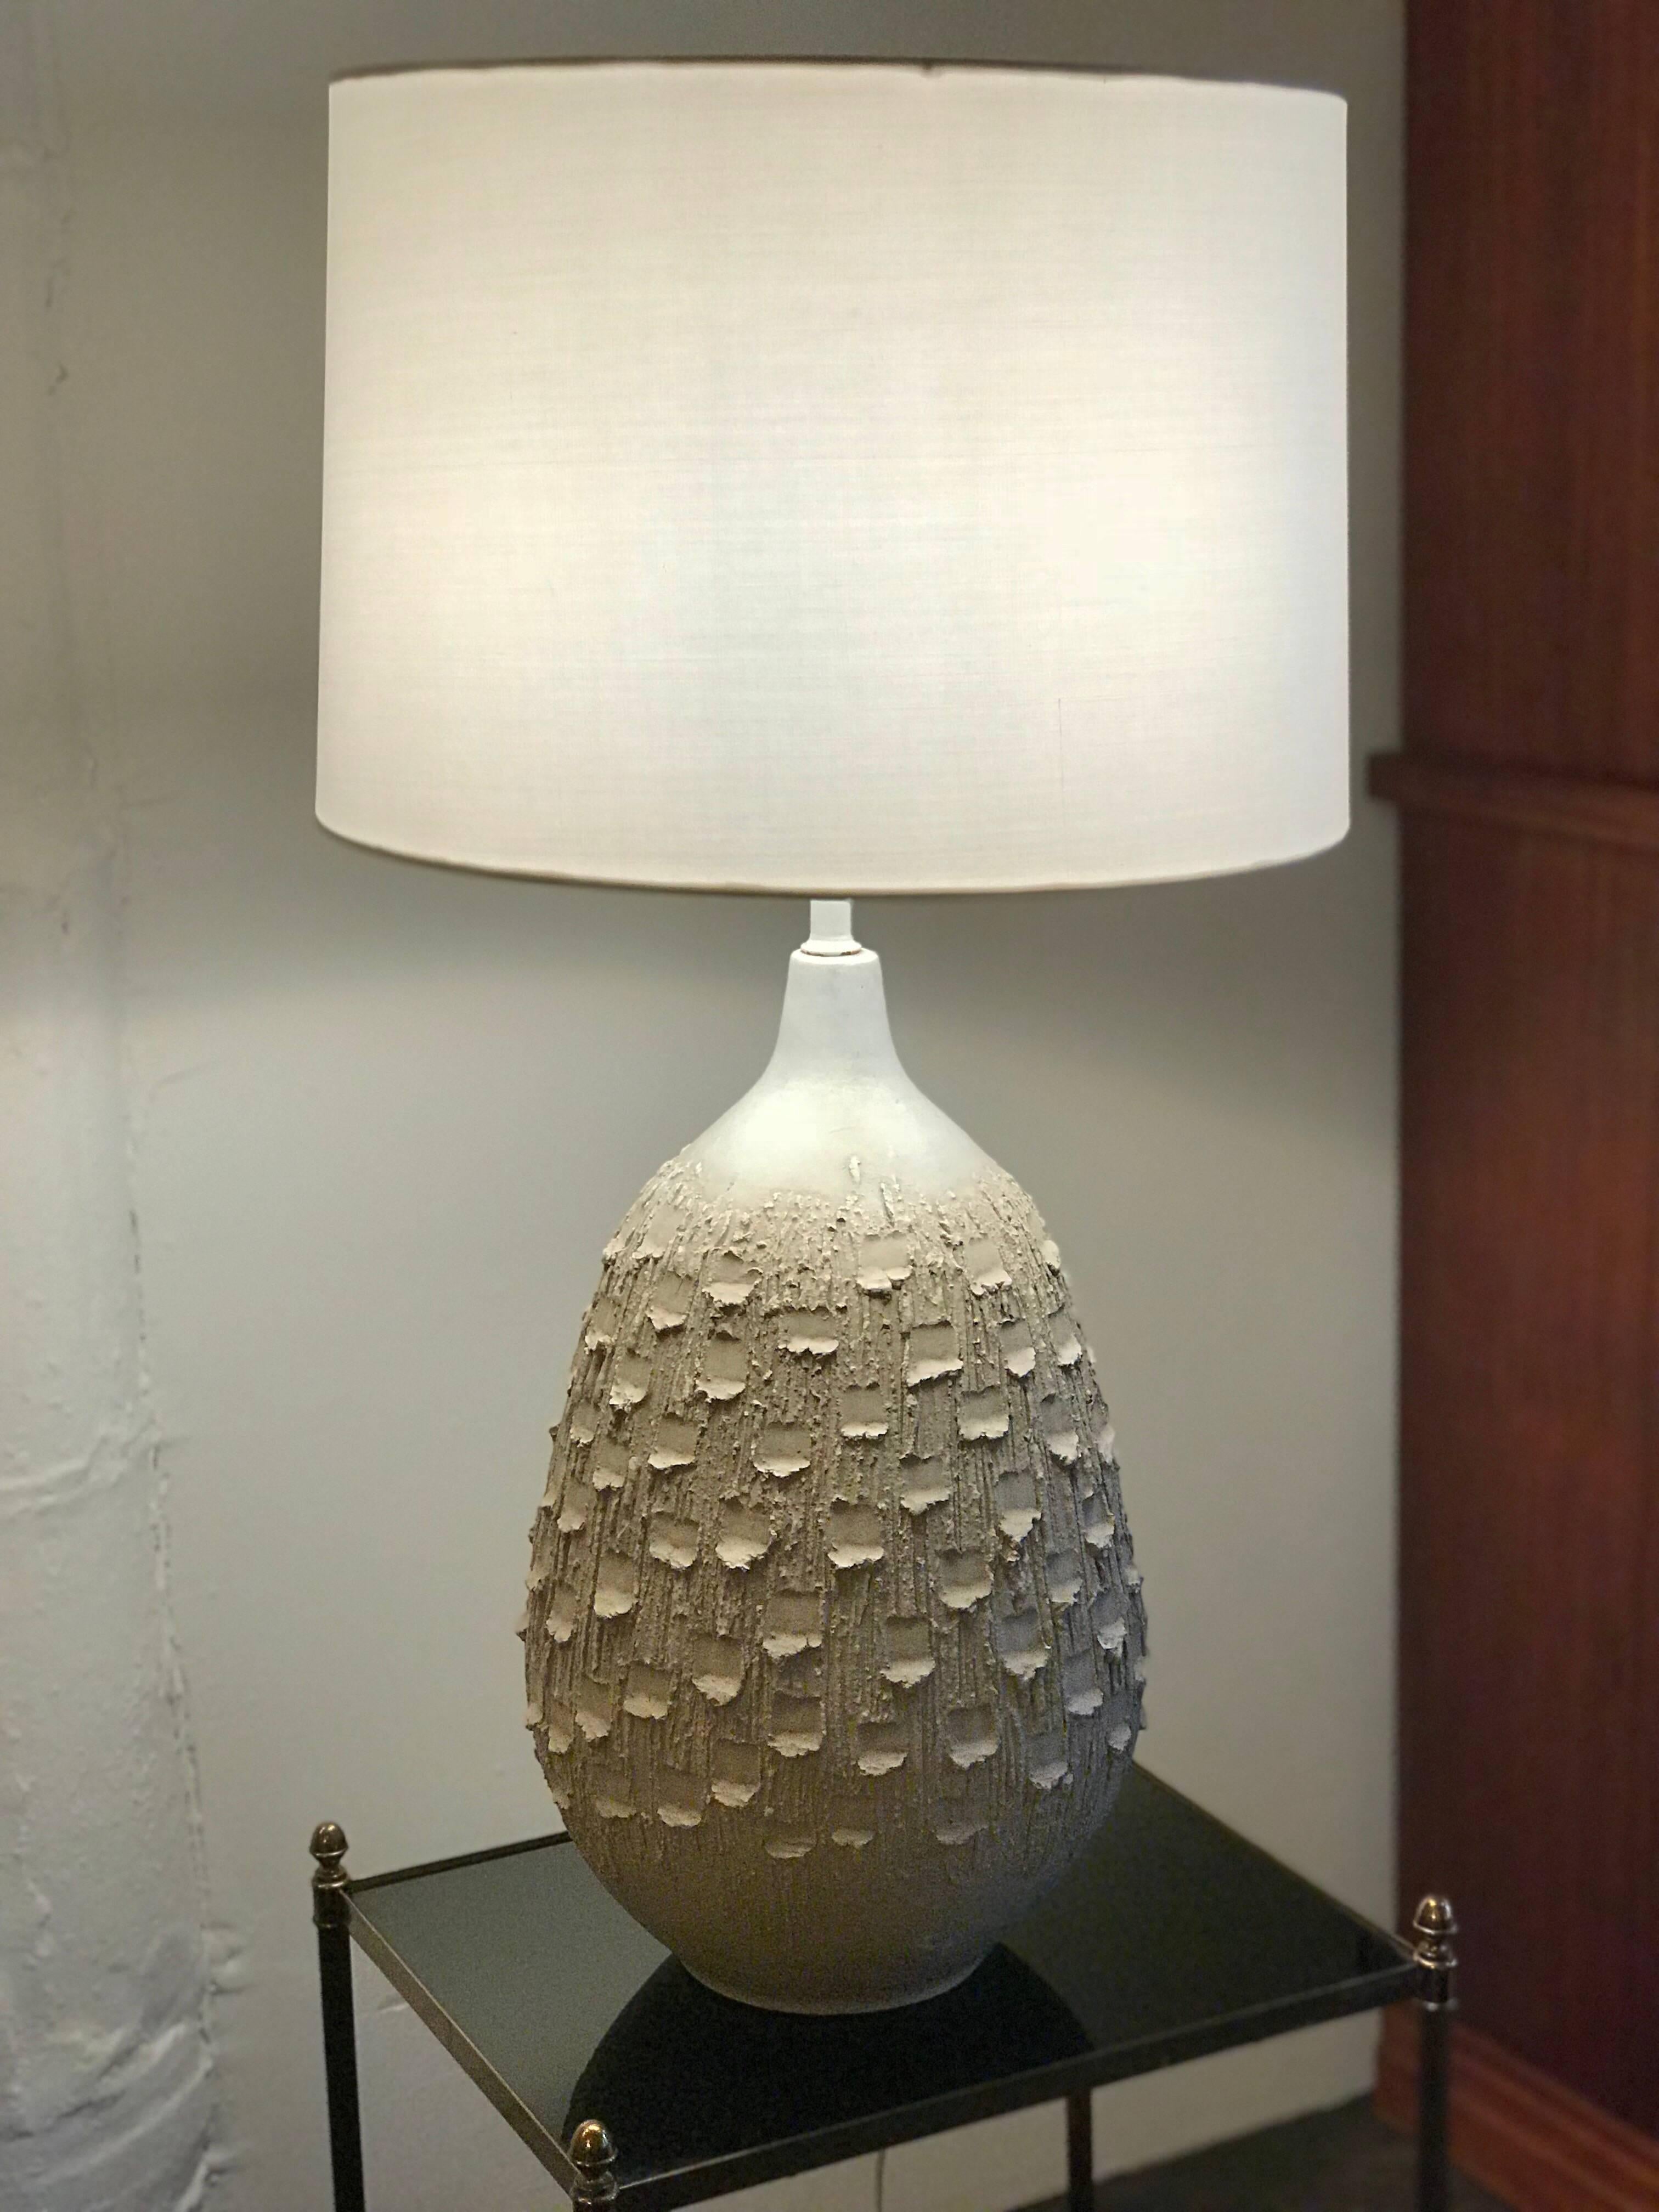 Superb handmade vintage ceramic lamp from the 1960s. Great condition. Brand new off-white silk rolled shade.

Shade dimensions: 15